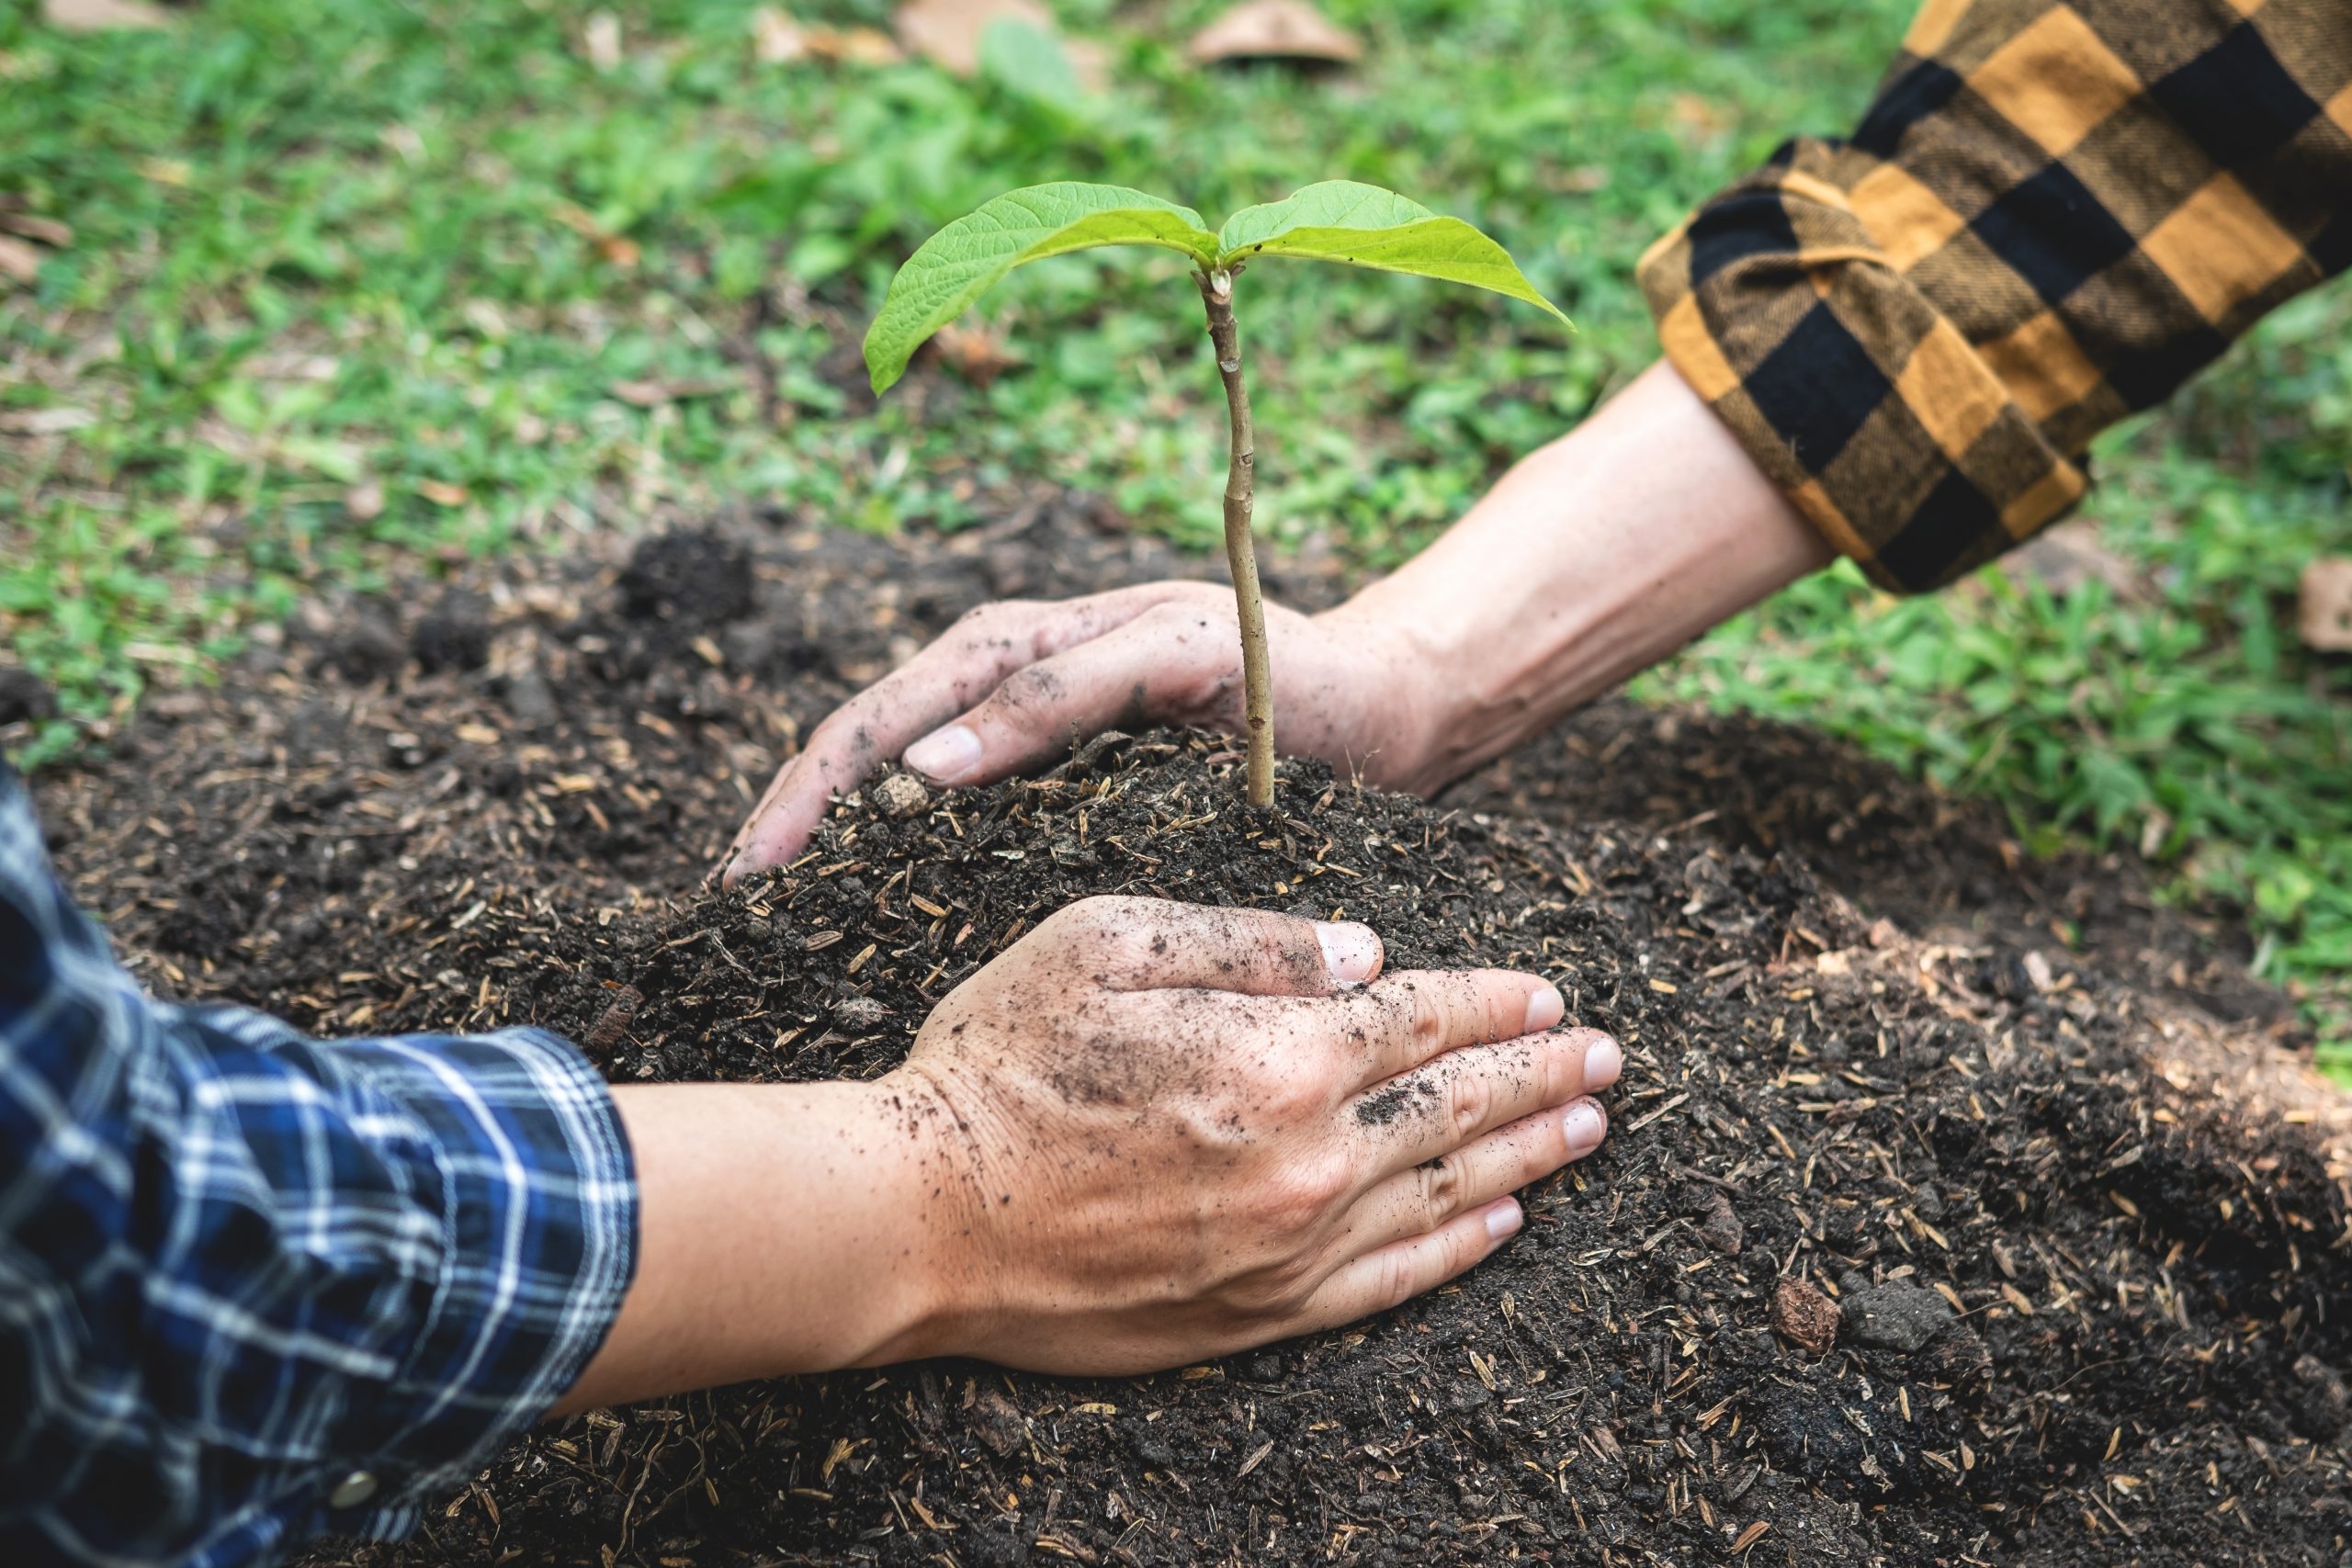 Reviving Our Planet: The Impact of Foundation Reforestation Efforts